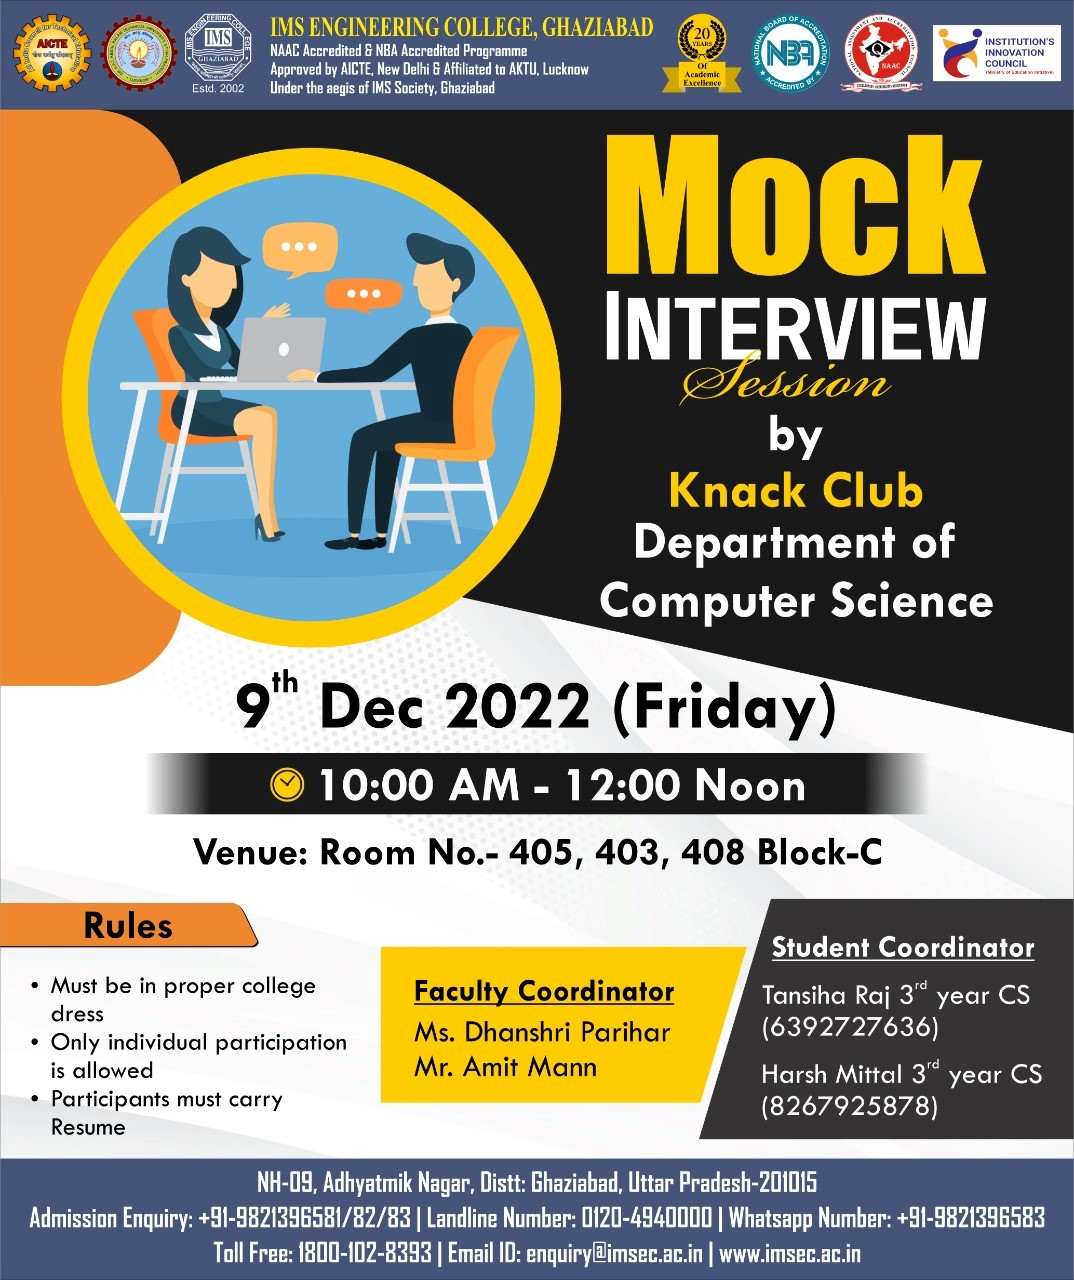 Mock interview session